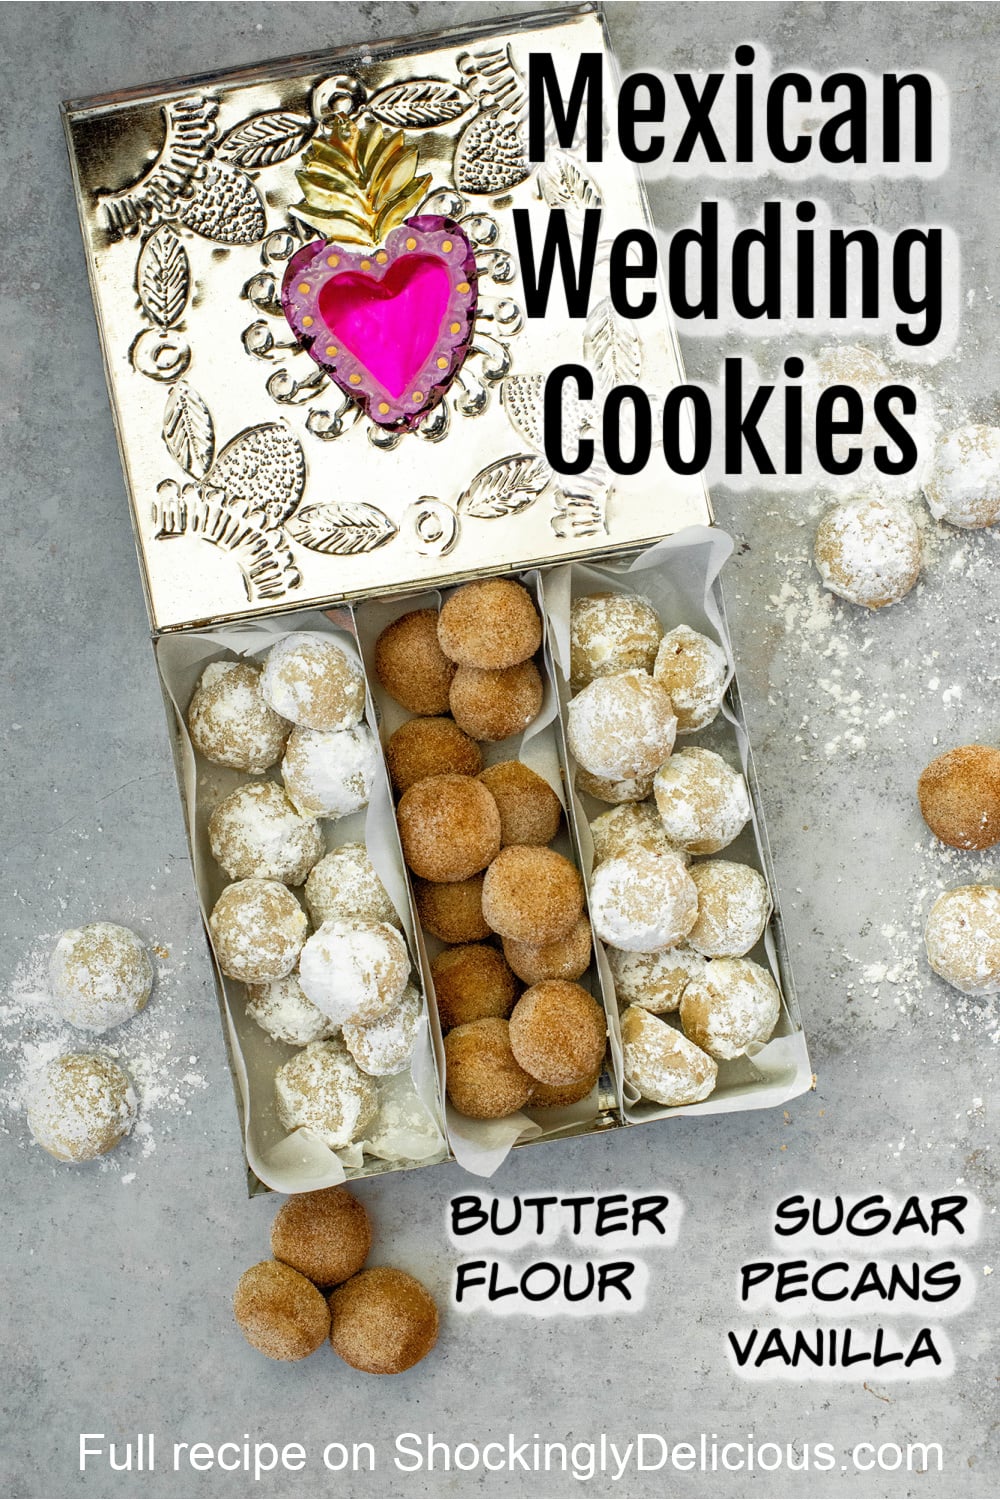 Mexican Wedding Cookies in a decorative metal box with a pink heart embossed on it and recipe title superimposed on the photo